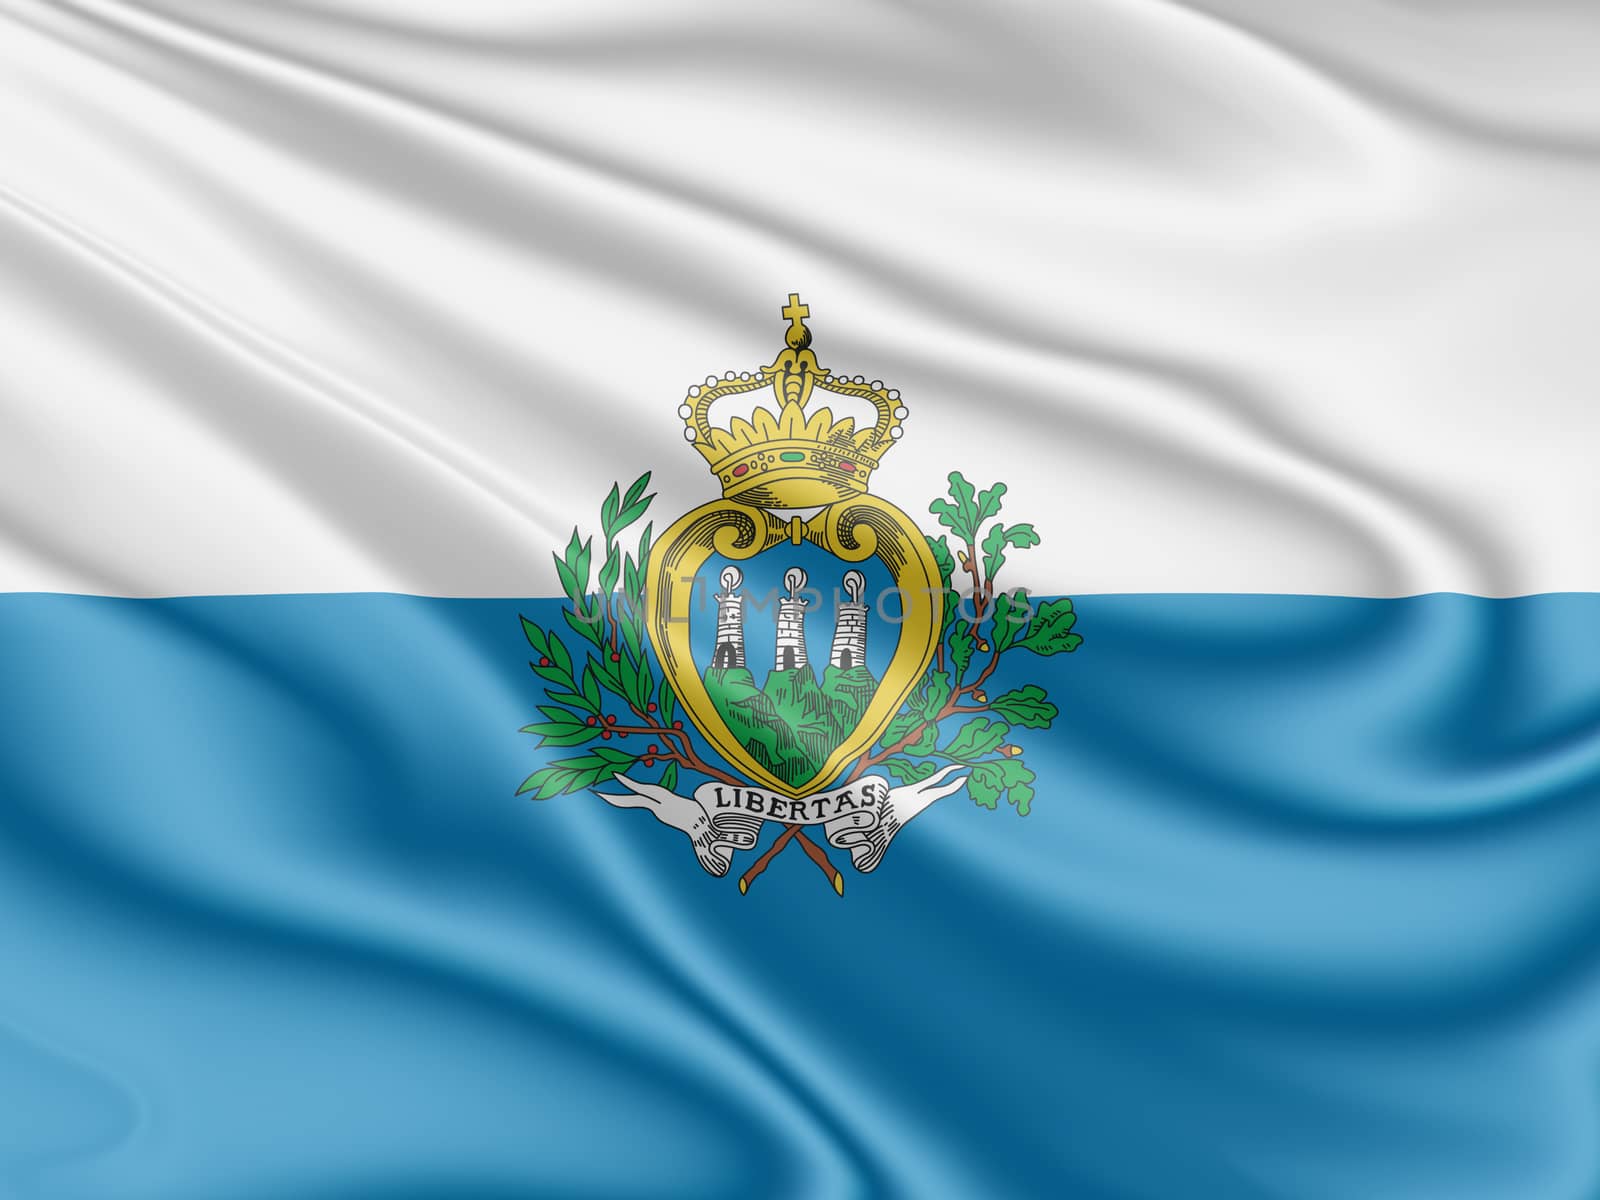 National flag of San Marino fluttering in the wind in 3D illustration